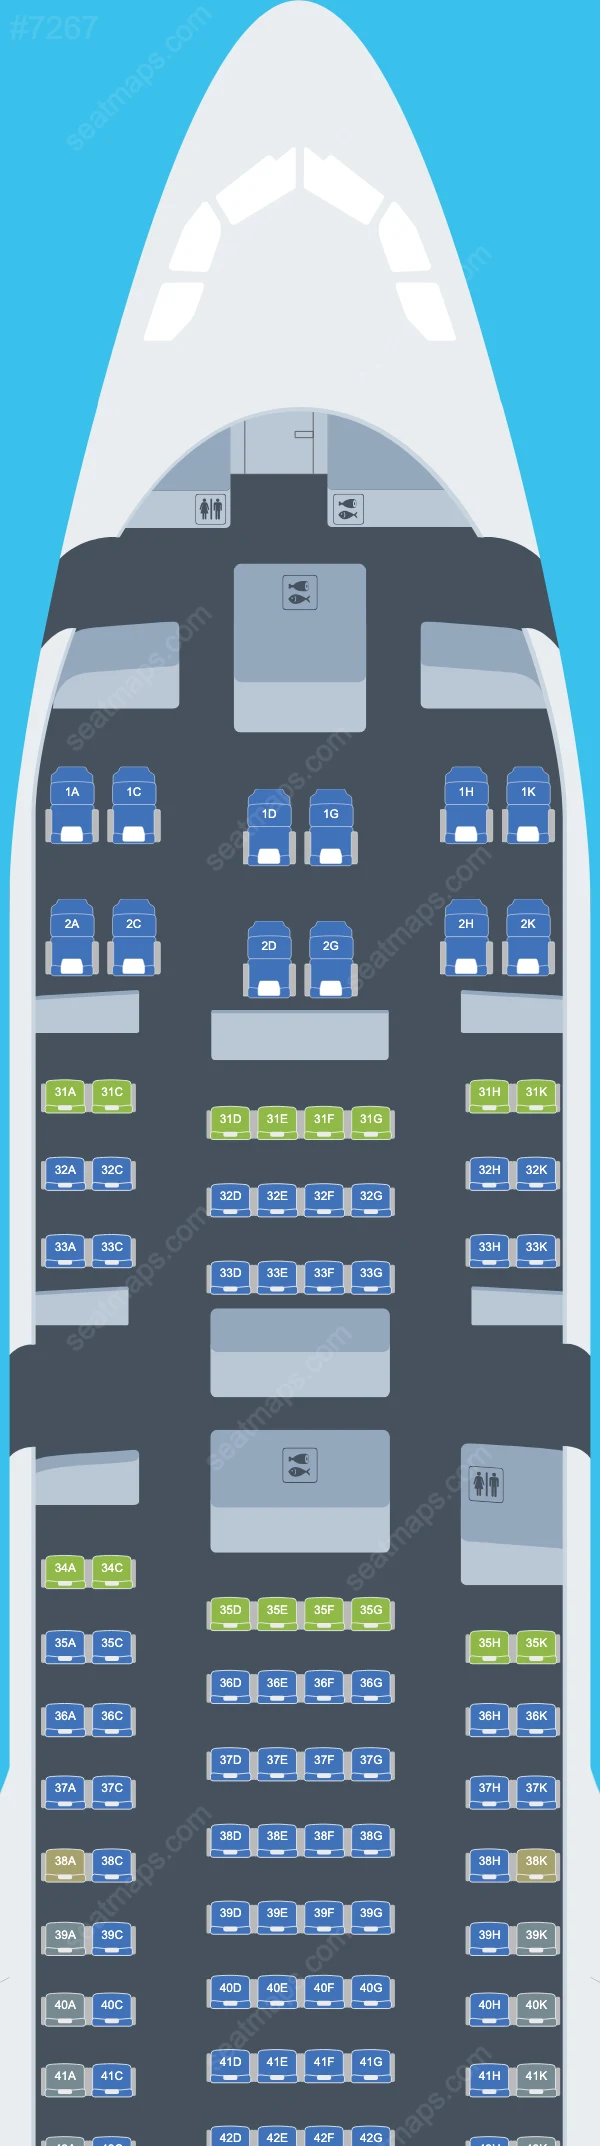 China Southern Airbus A330 Seat Maps A330-200 V.4